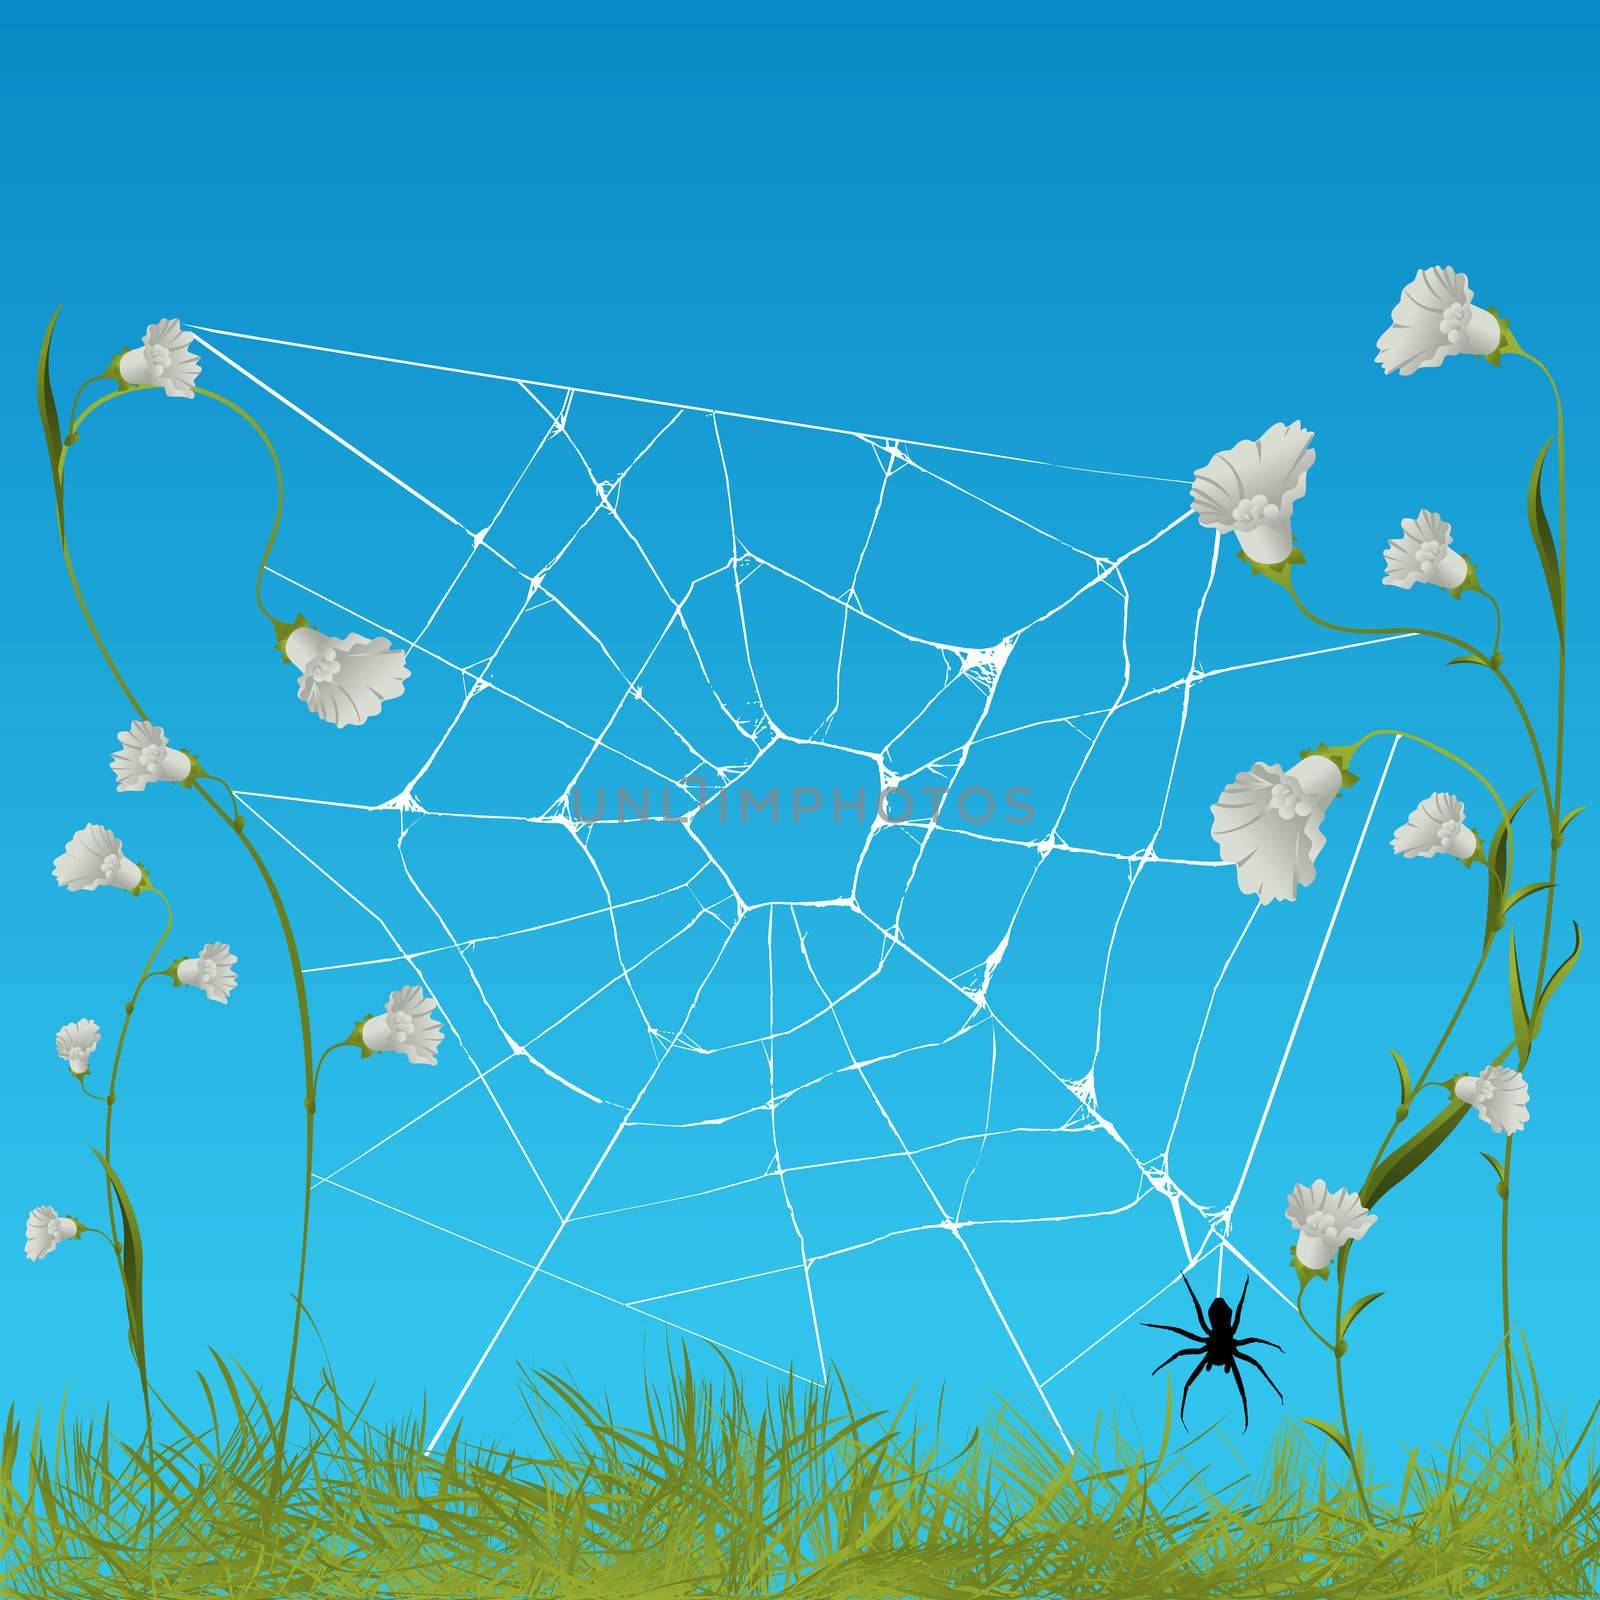 web spider among flowers, graphic art